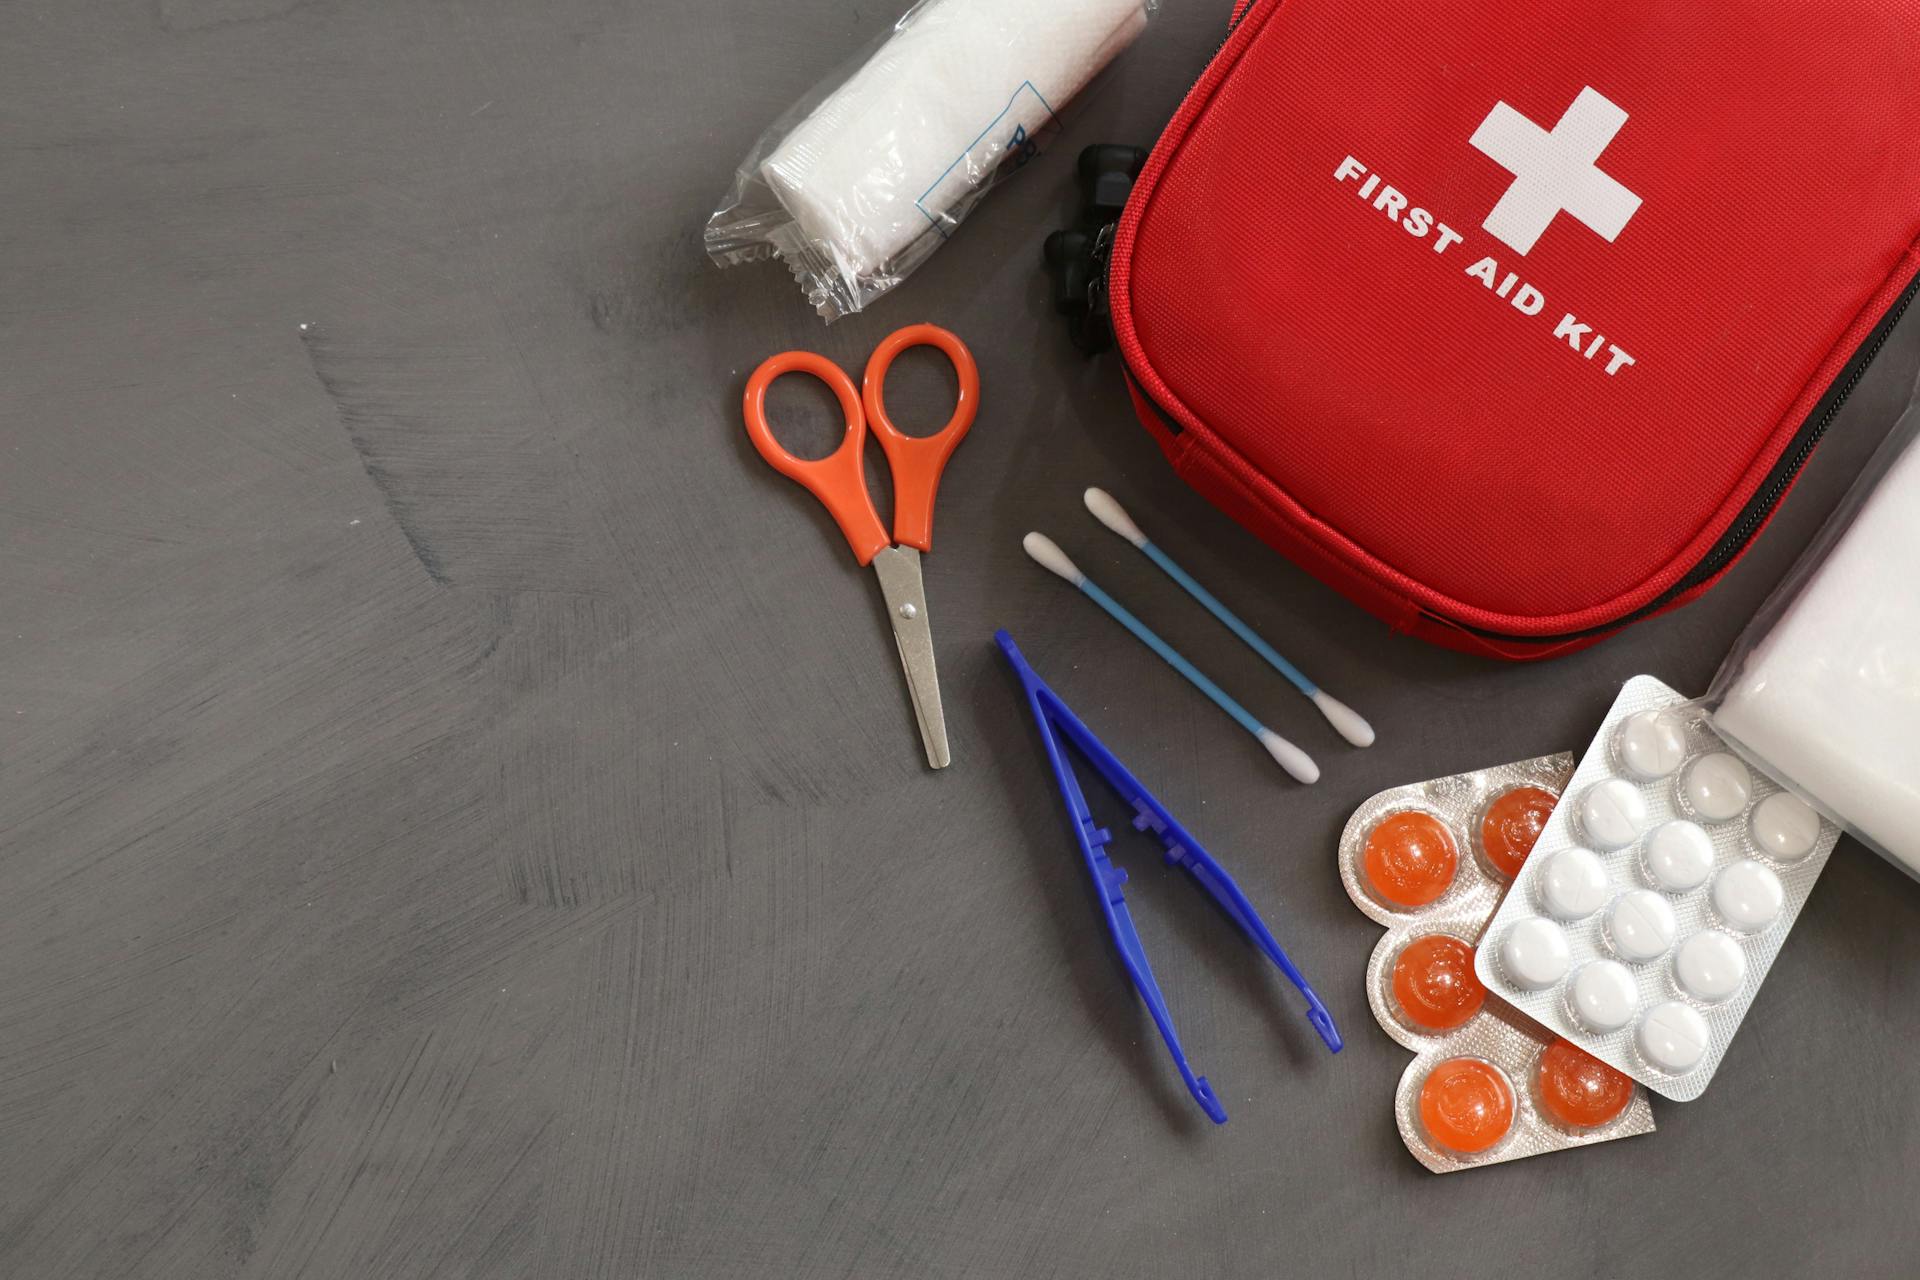 A first aid kit with medical equipment